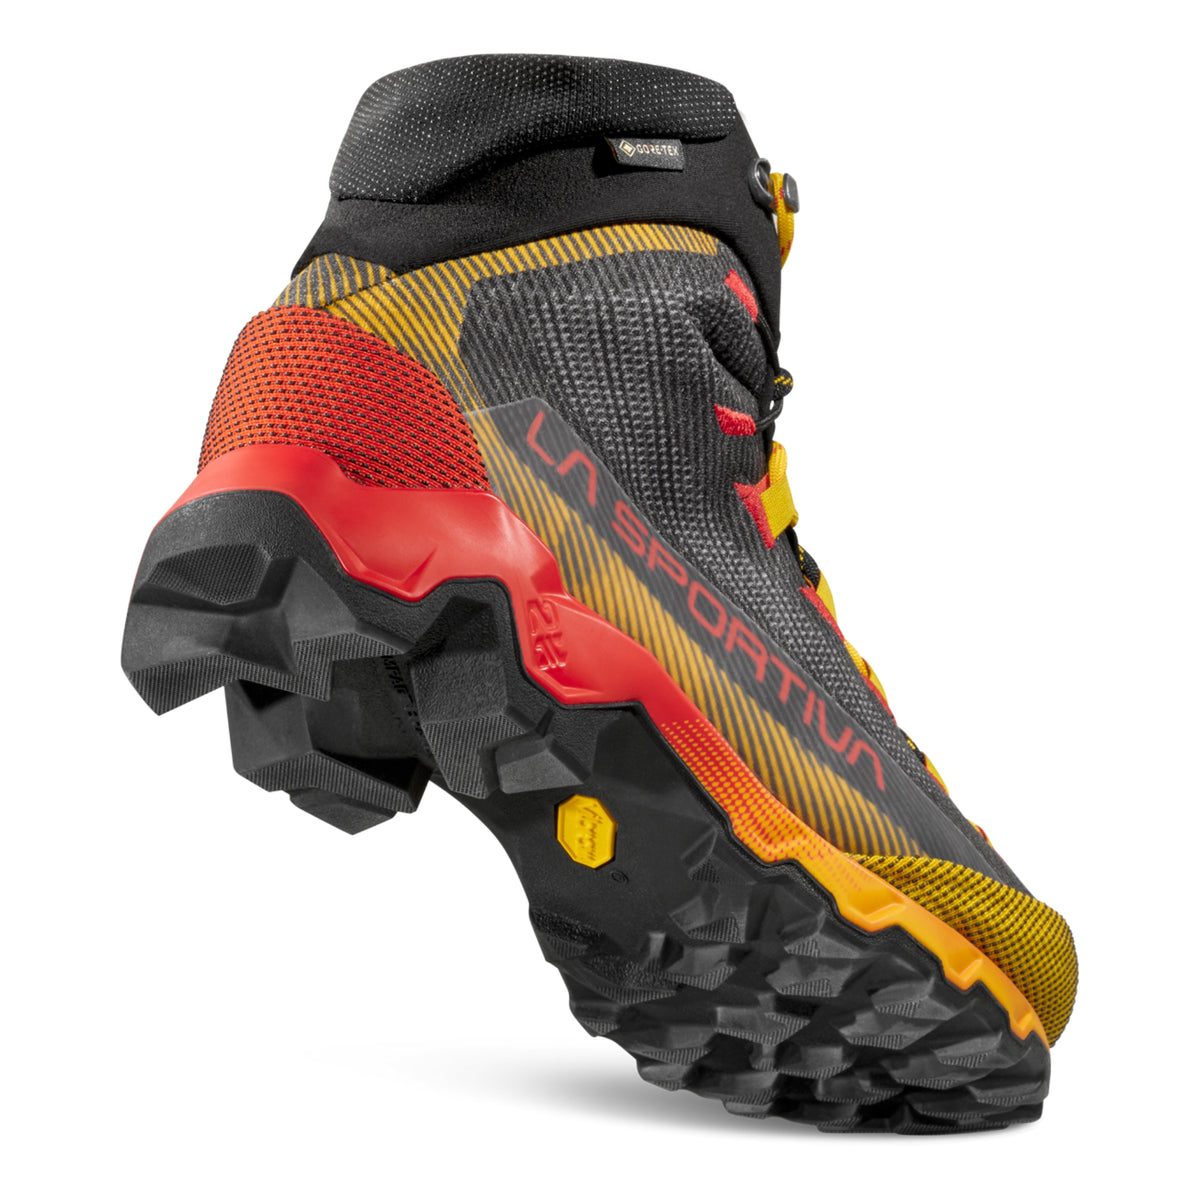 La Sportiva Aequilibrium Hike GTX - Mens in carbon yellow colour showing the double heel